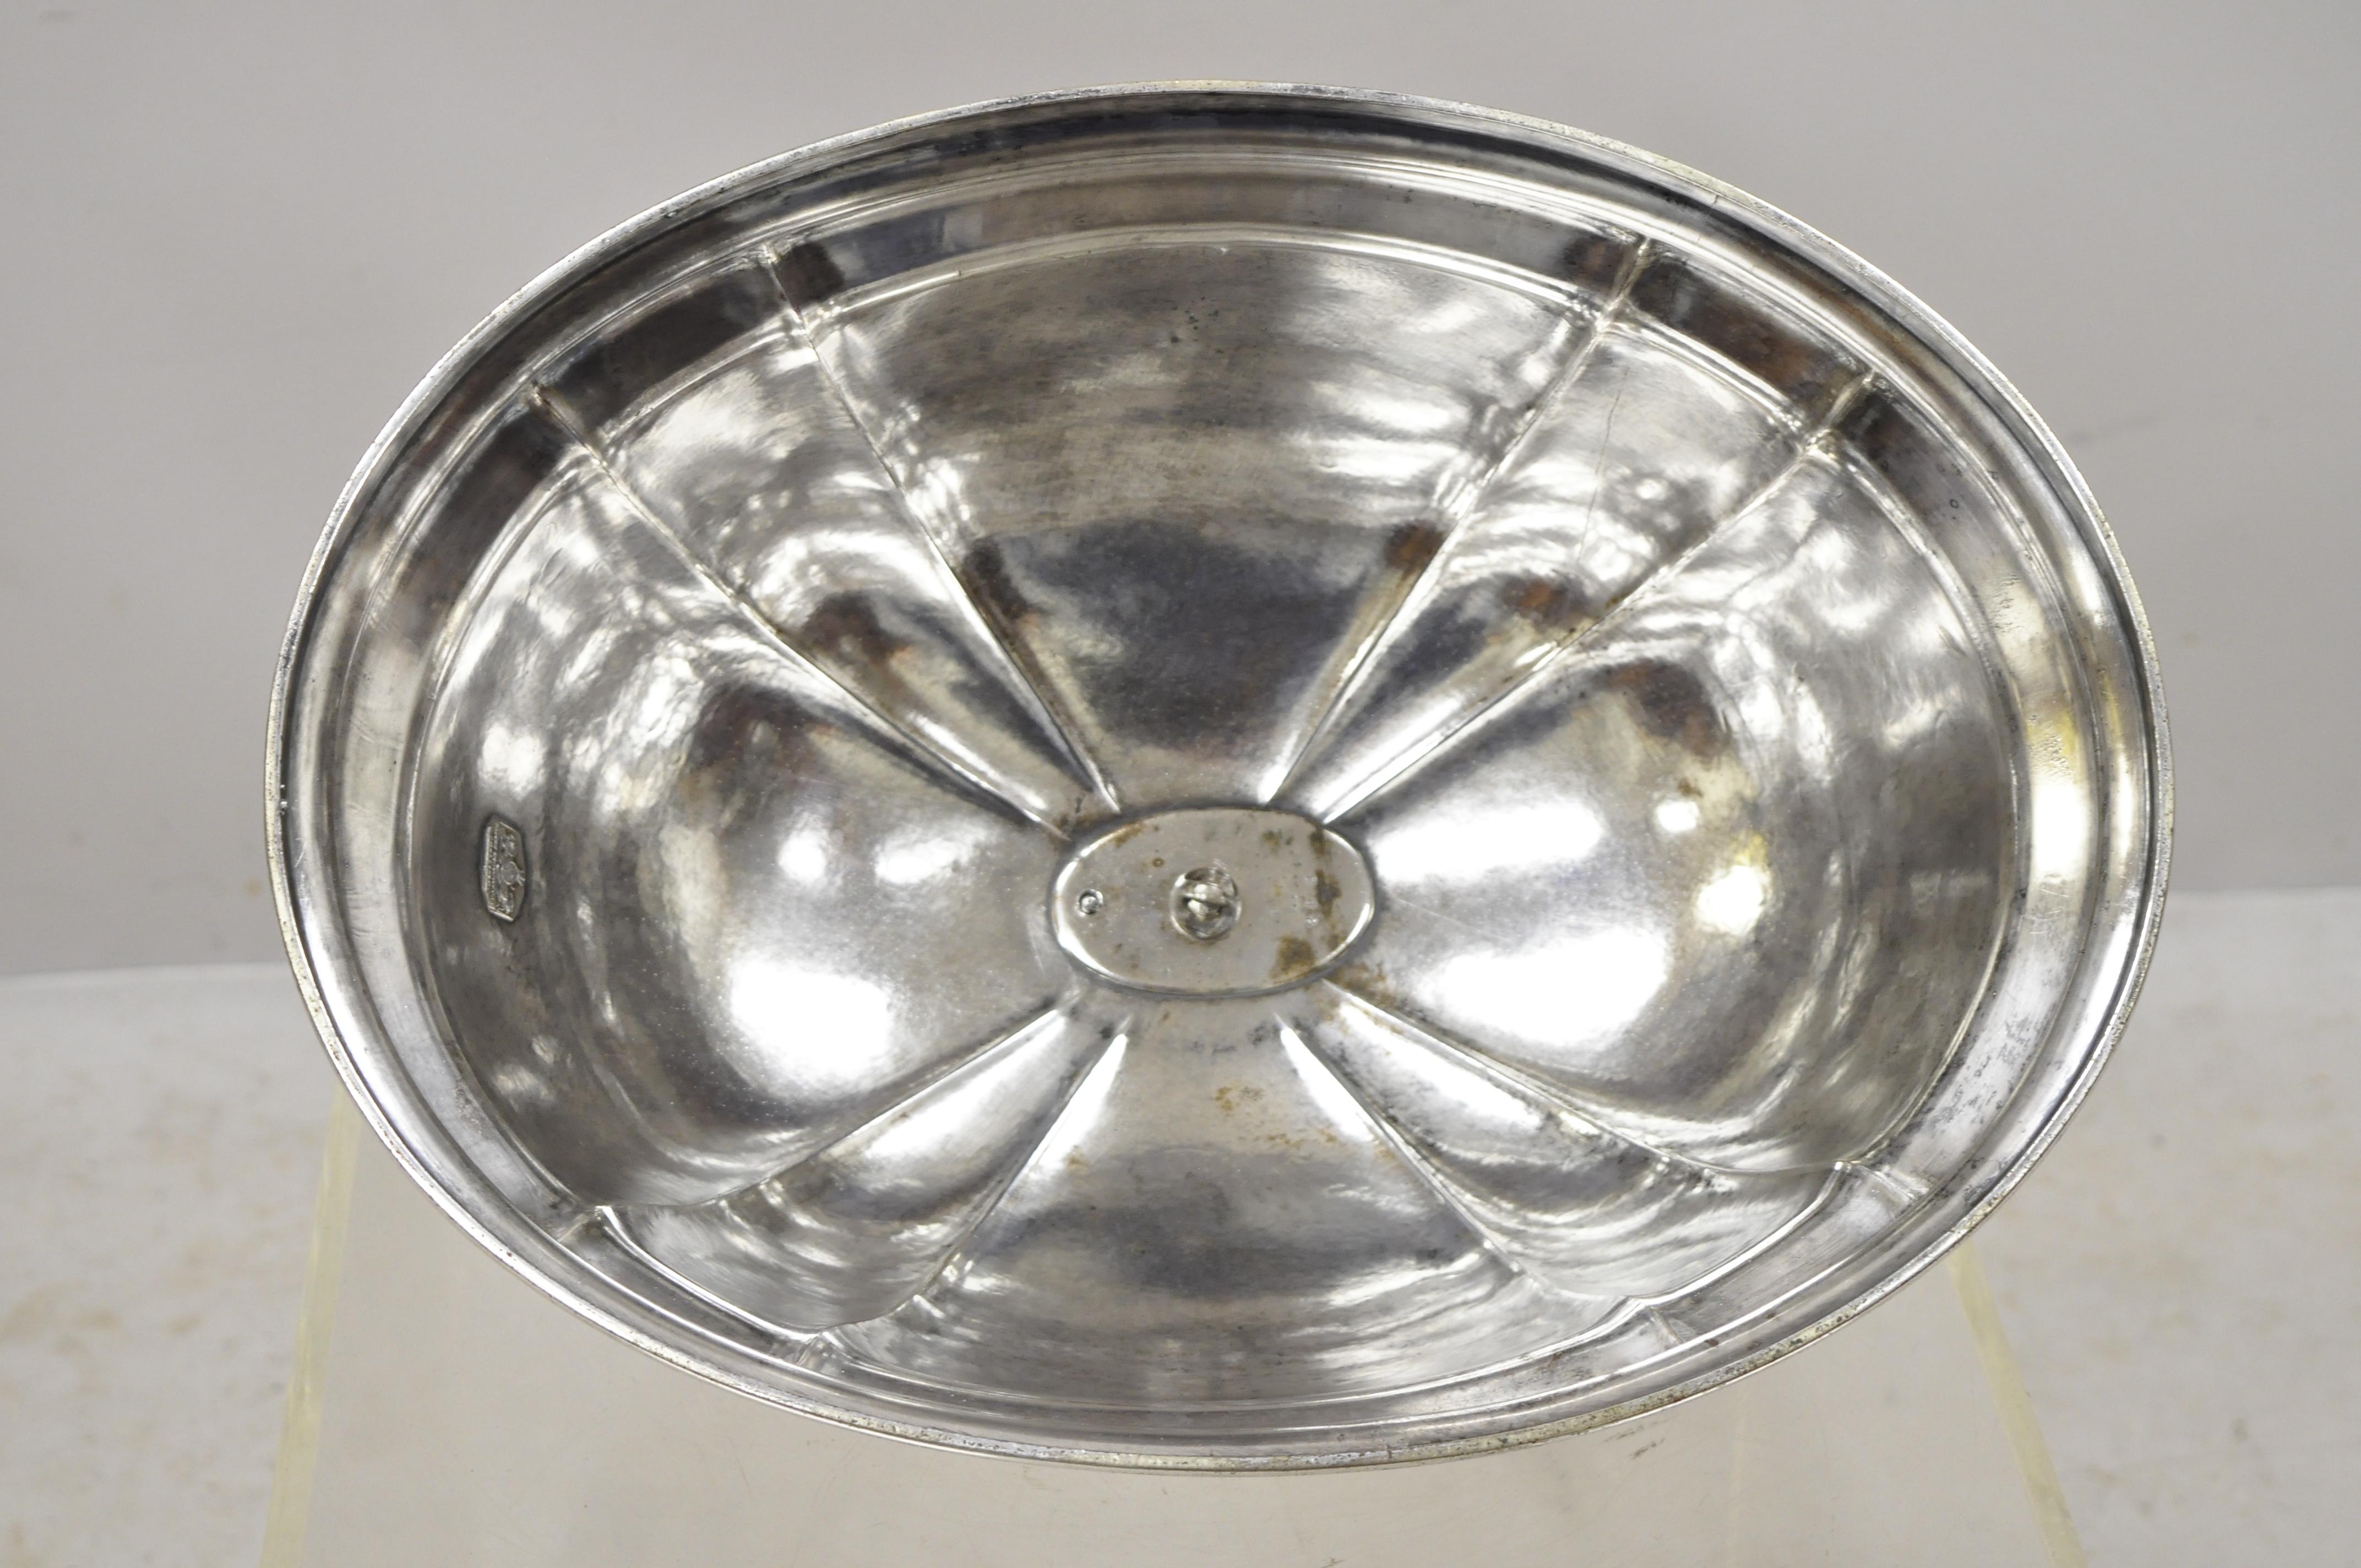 James Dixon & Sons Sheffield England Silverplate Meat Dish Serving Dome Lid For Sale 1